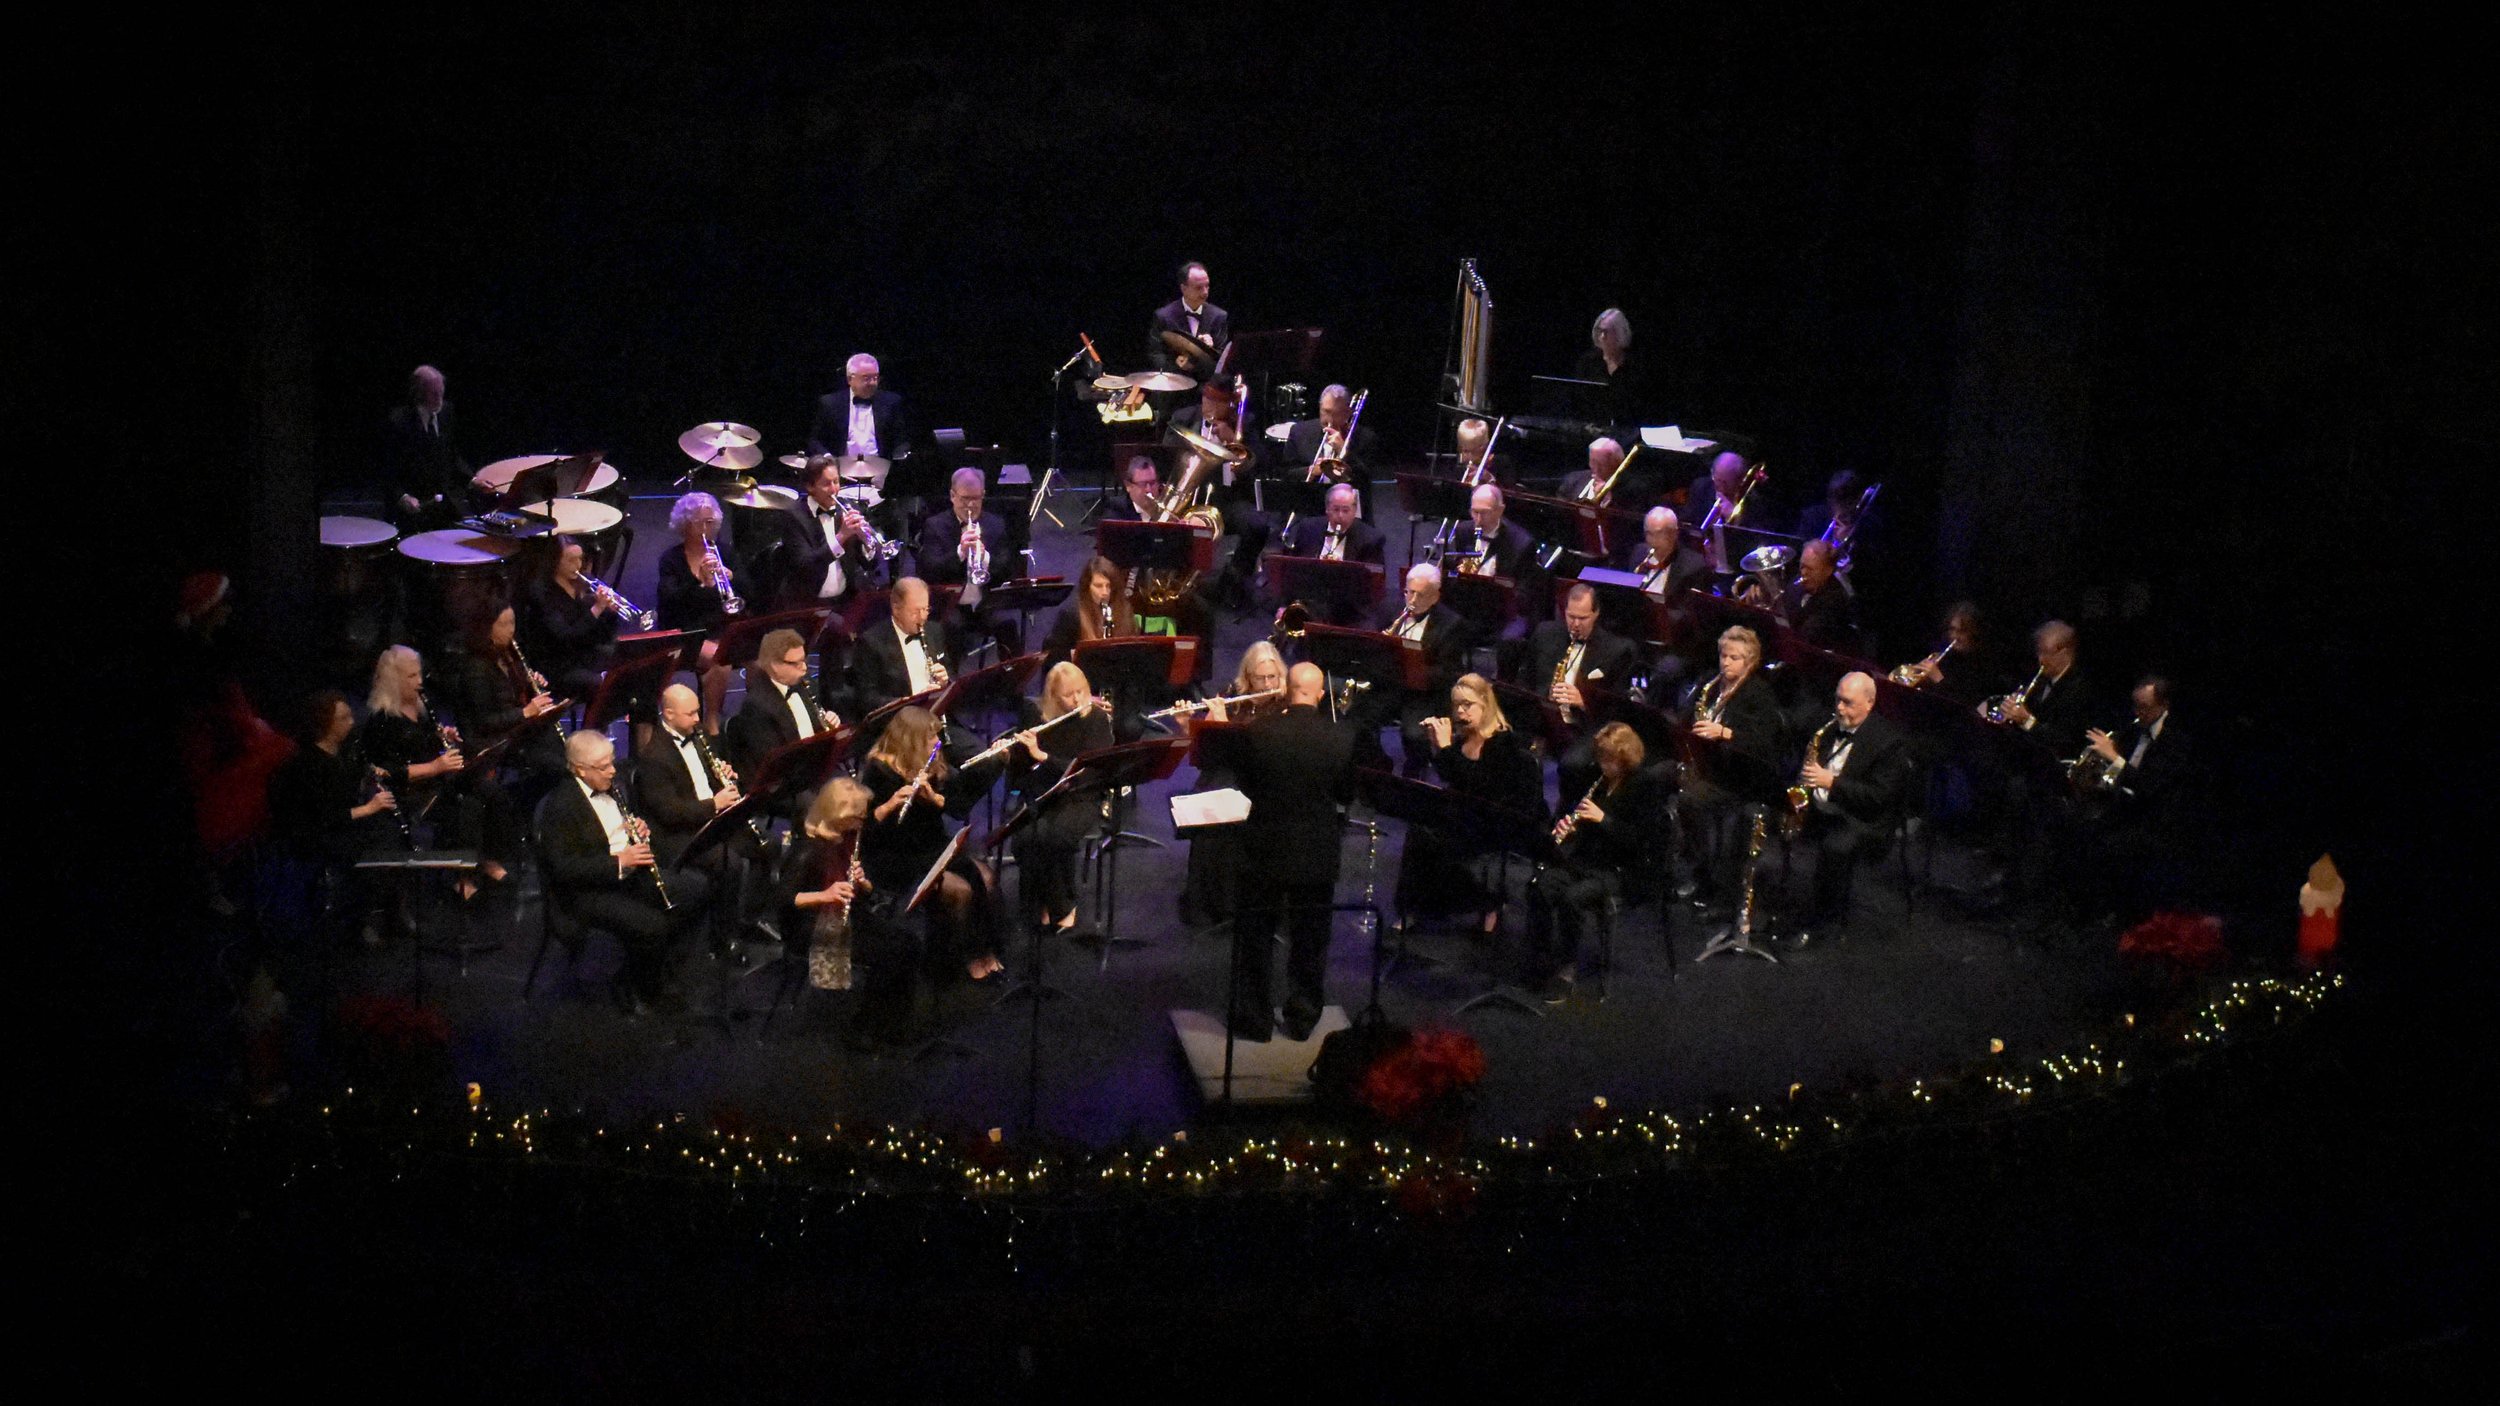 12-19-2021 LCB Holiday Concert by Peyton Webster41-22.jpg